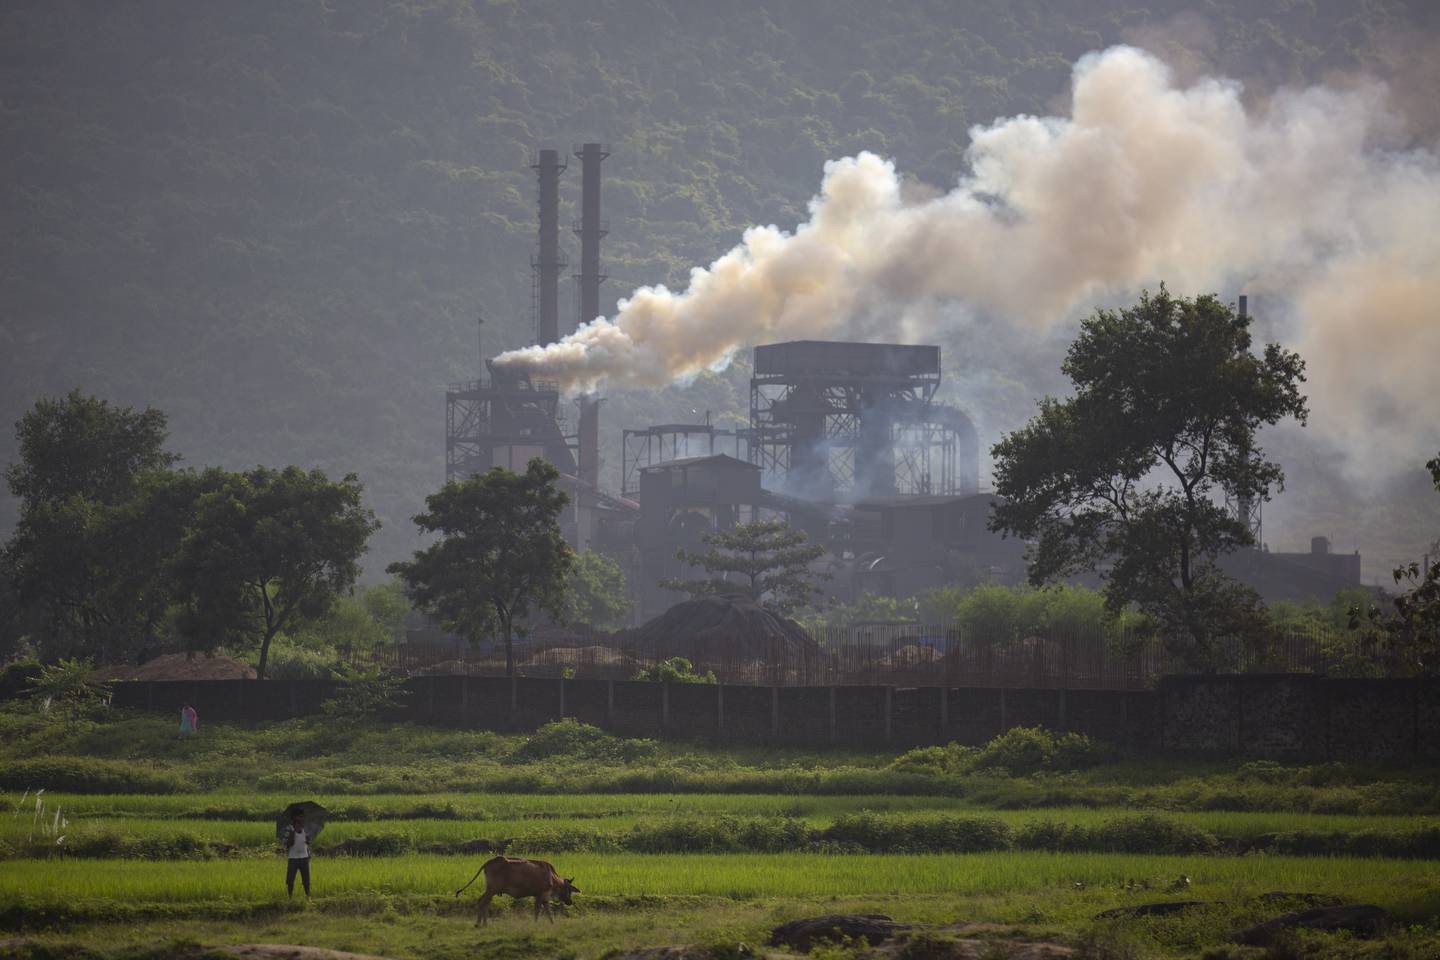 Smoke rises from a steel plant near Ranchi in Jharkhand state that is powered by coal, a fuel source India has pledged to turn away from under its commitments to curb climate change. AP